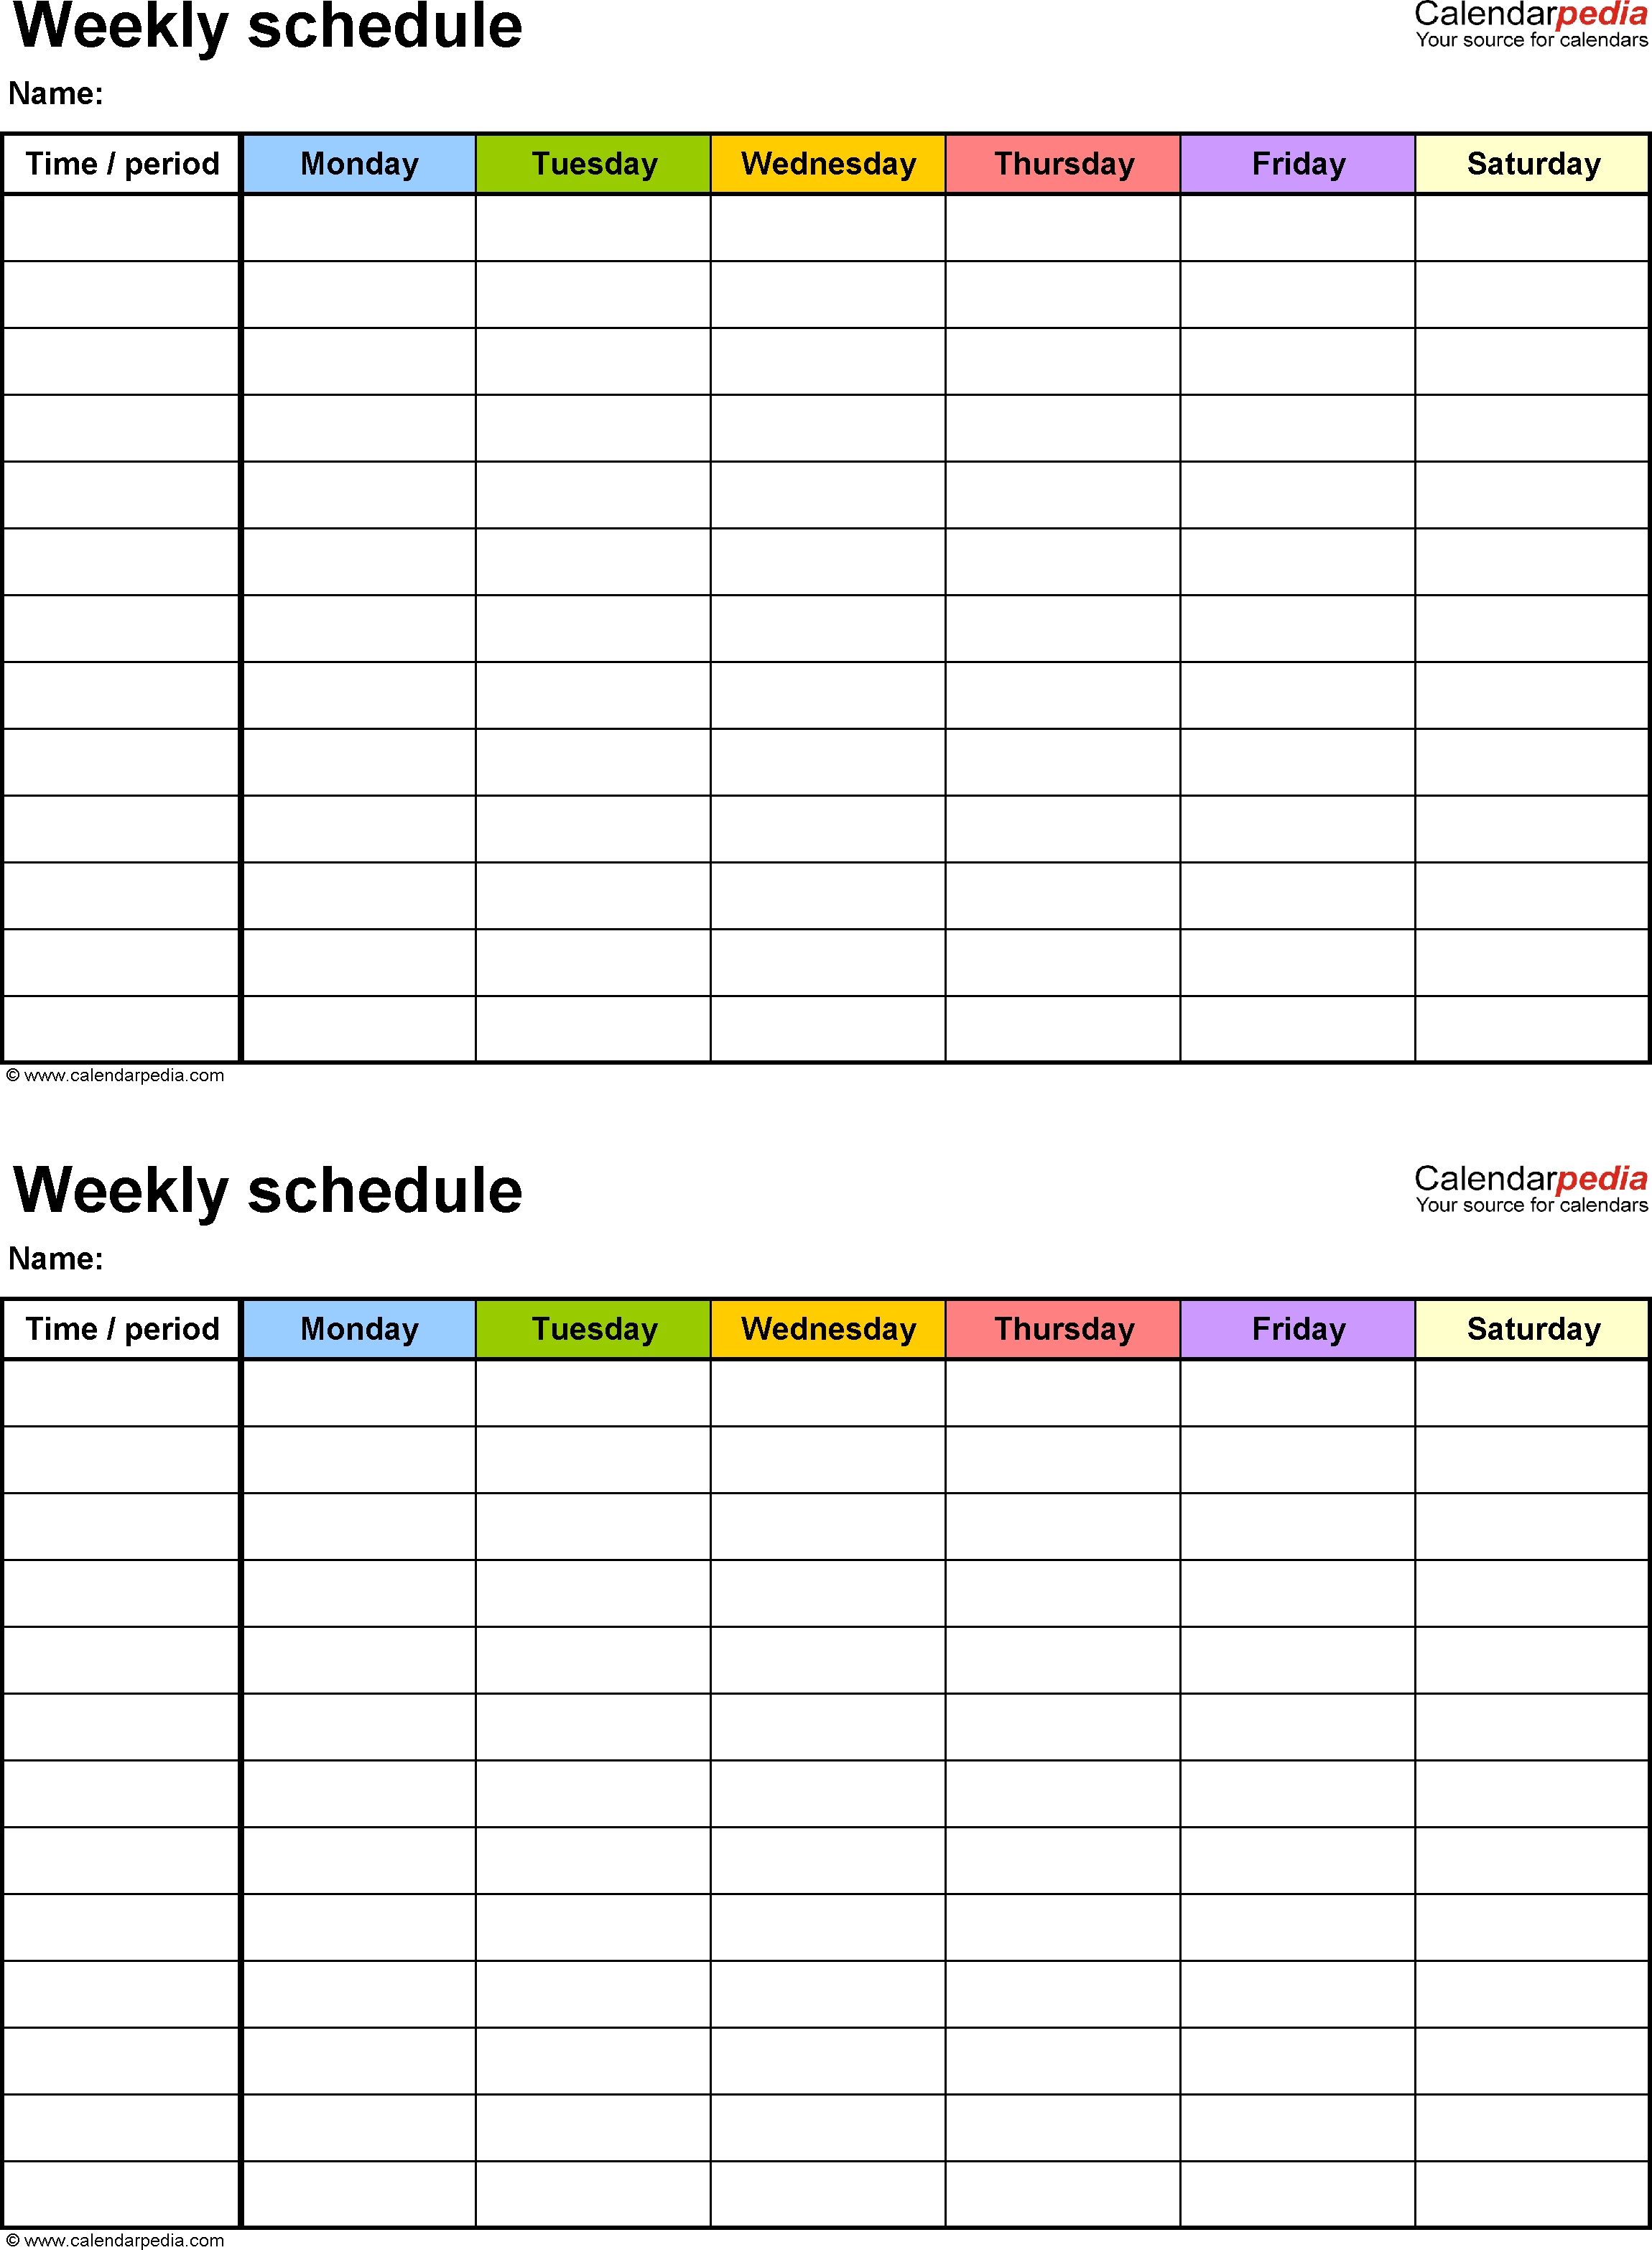 Free Weekly Schedule Templates For Word - 18 Templates-Monday To Friday Schedule Template